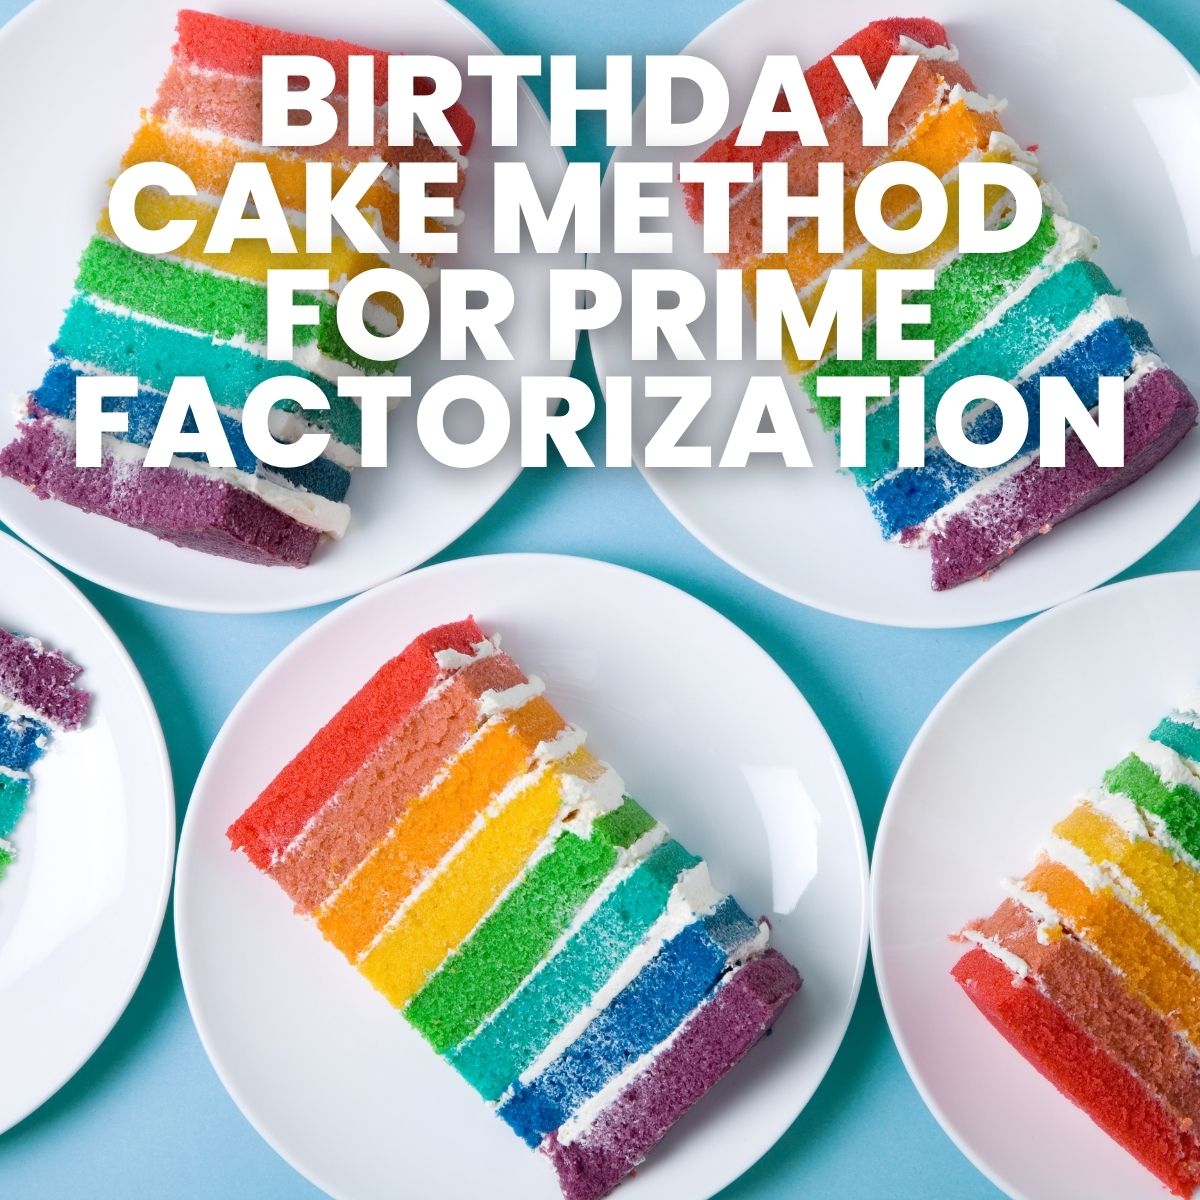 Scaffolded Math and Science: Finding GCF and LCM with the Ladder (or Cake)  Method